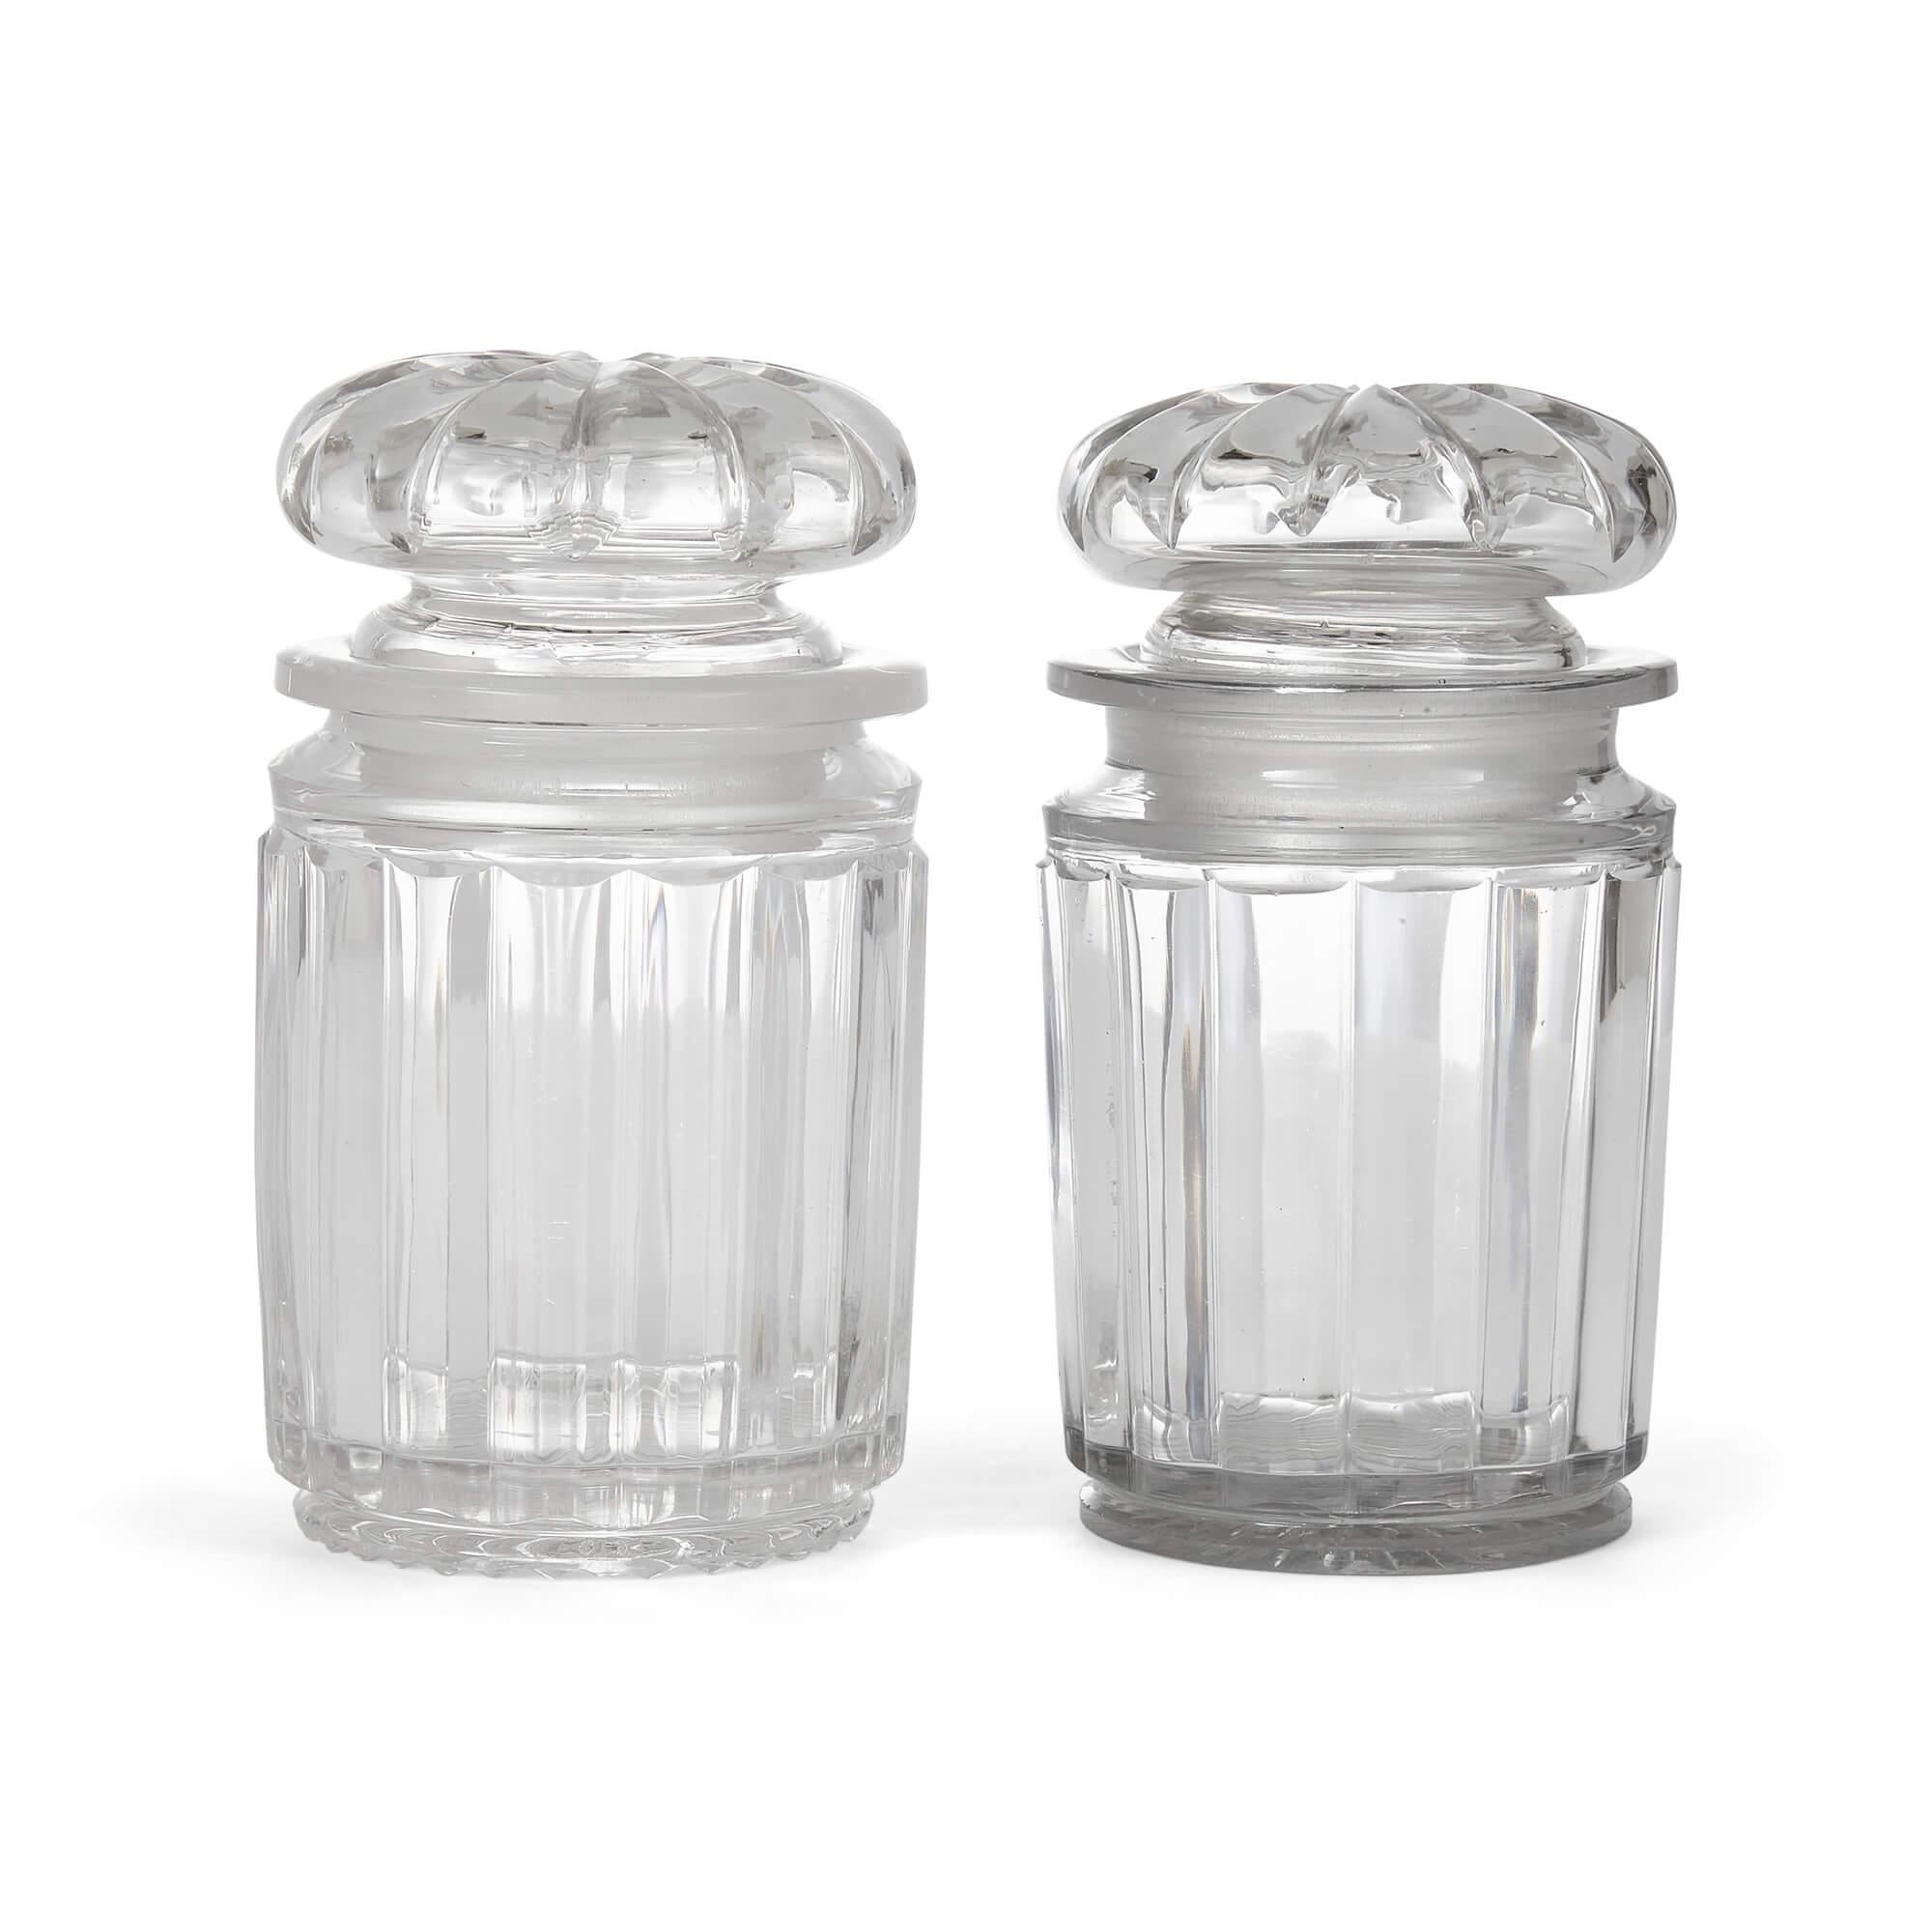 Pair of fine English glass jars with fitted stoppers.
English, 20th century
Measures : Height 16cm, diameter 8.5cm

Of an elegant and simple design, immaculately finished, these fine glass jars were made in England in the course of the twentieth